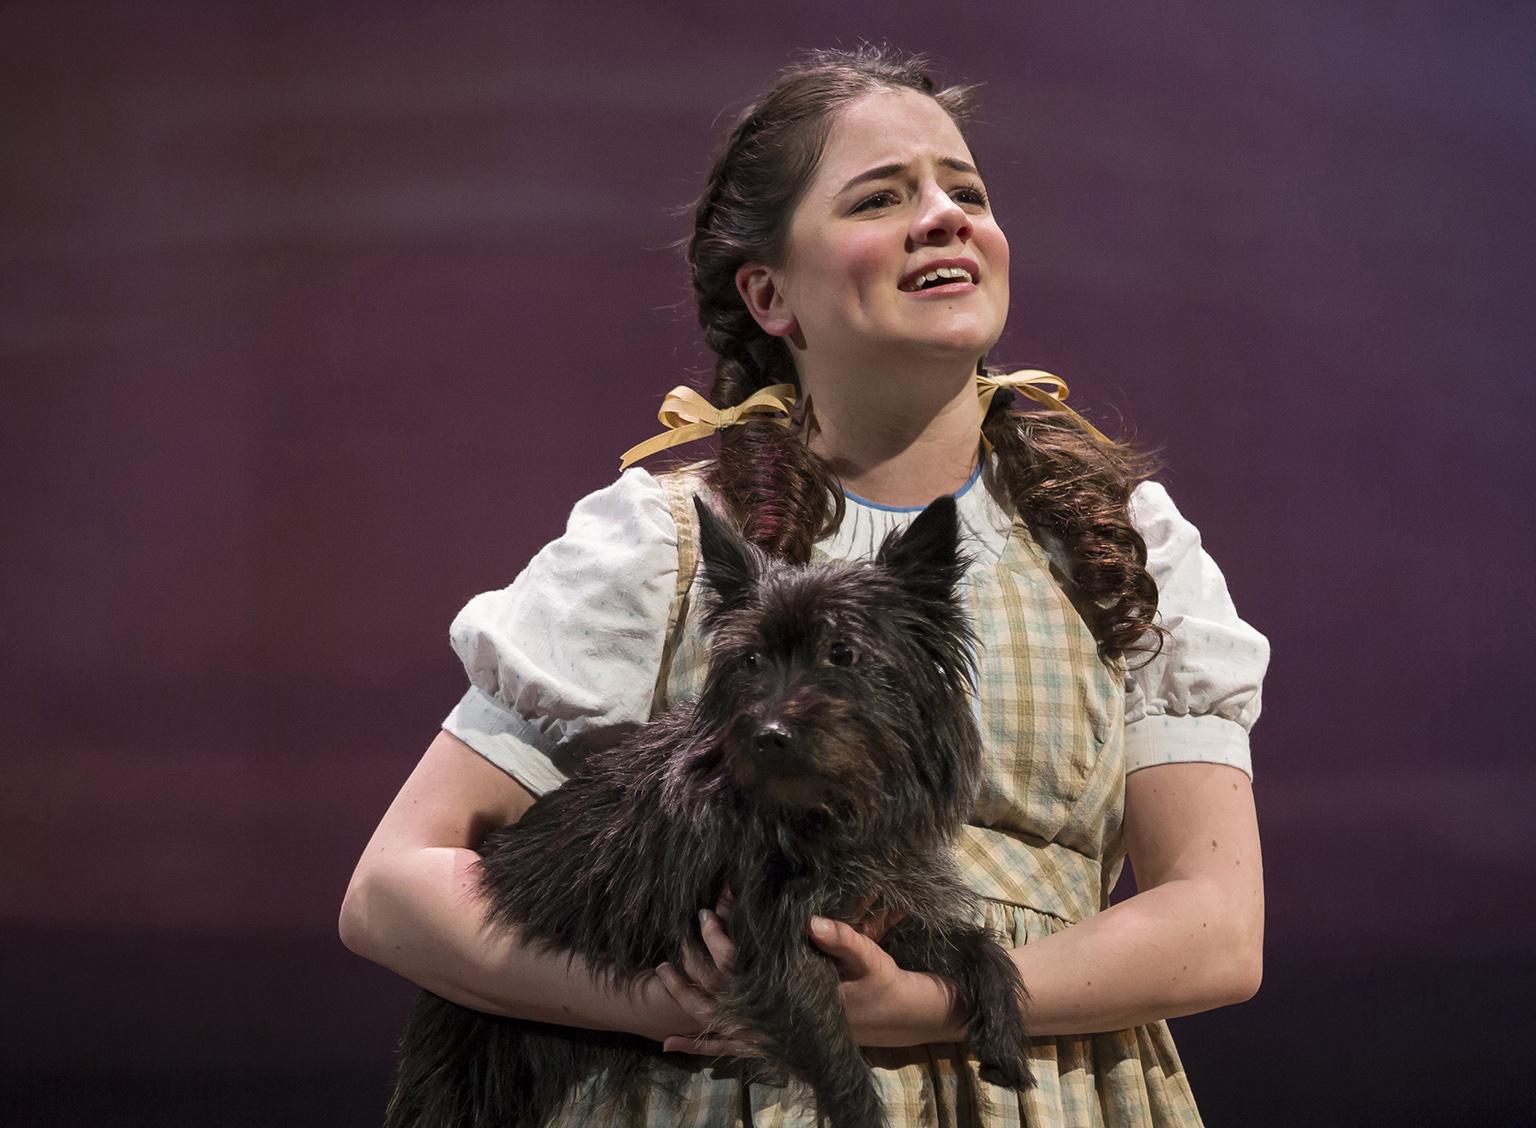 Elizabeth Stenholt as Dorothy and Nessa as Toto in “The Wizard of Oz.” (Photo credit: Liz Lauren)